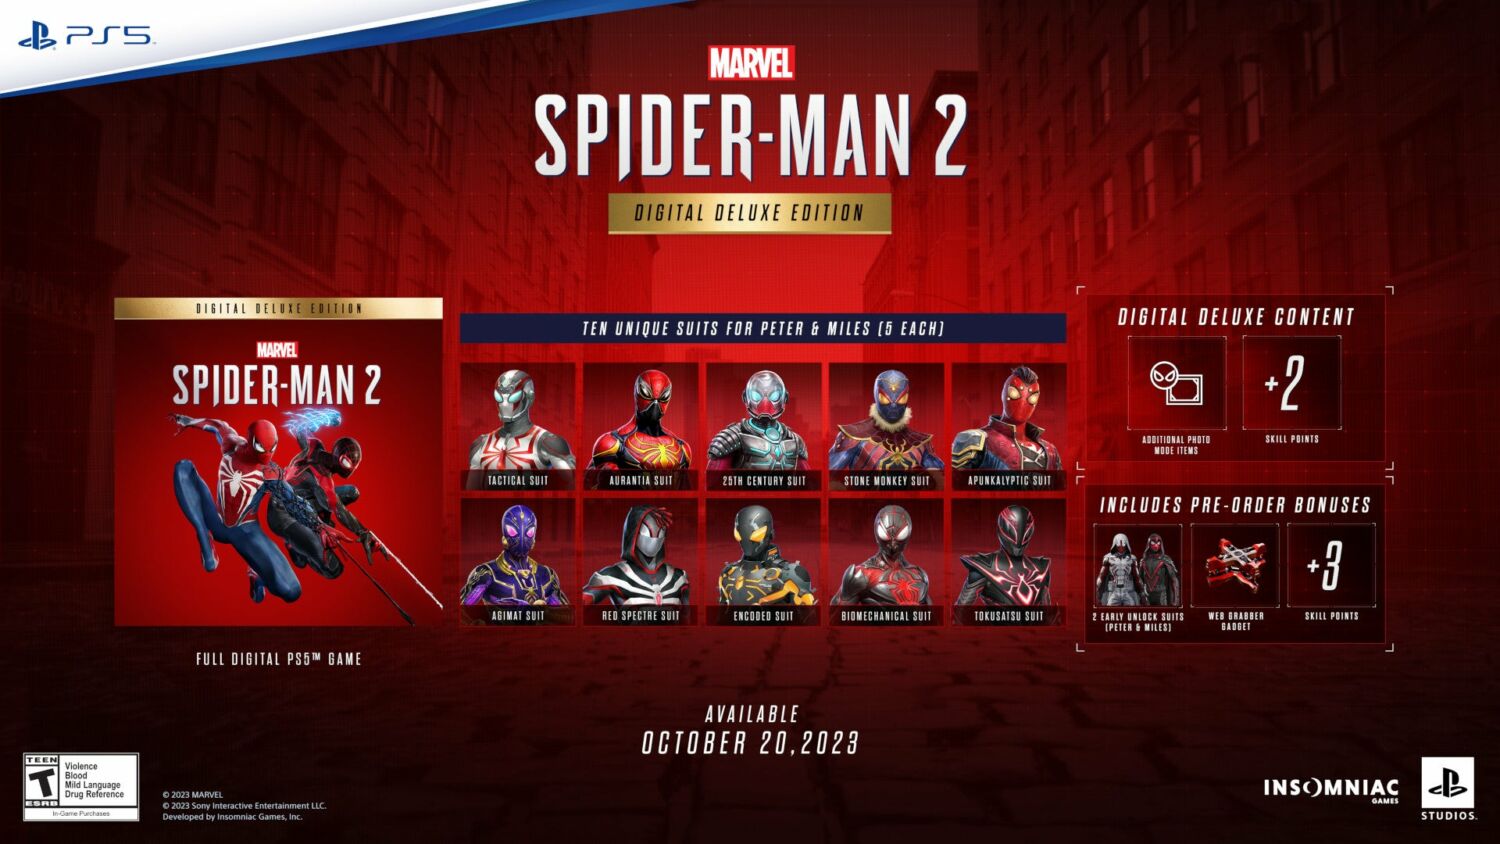 When is Marvel's Spiderman 2 coming to PC?